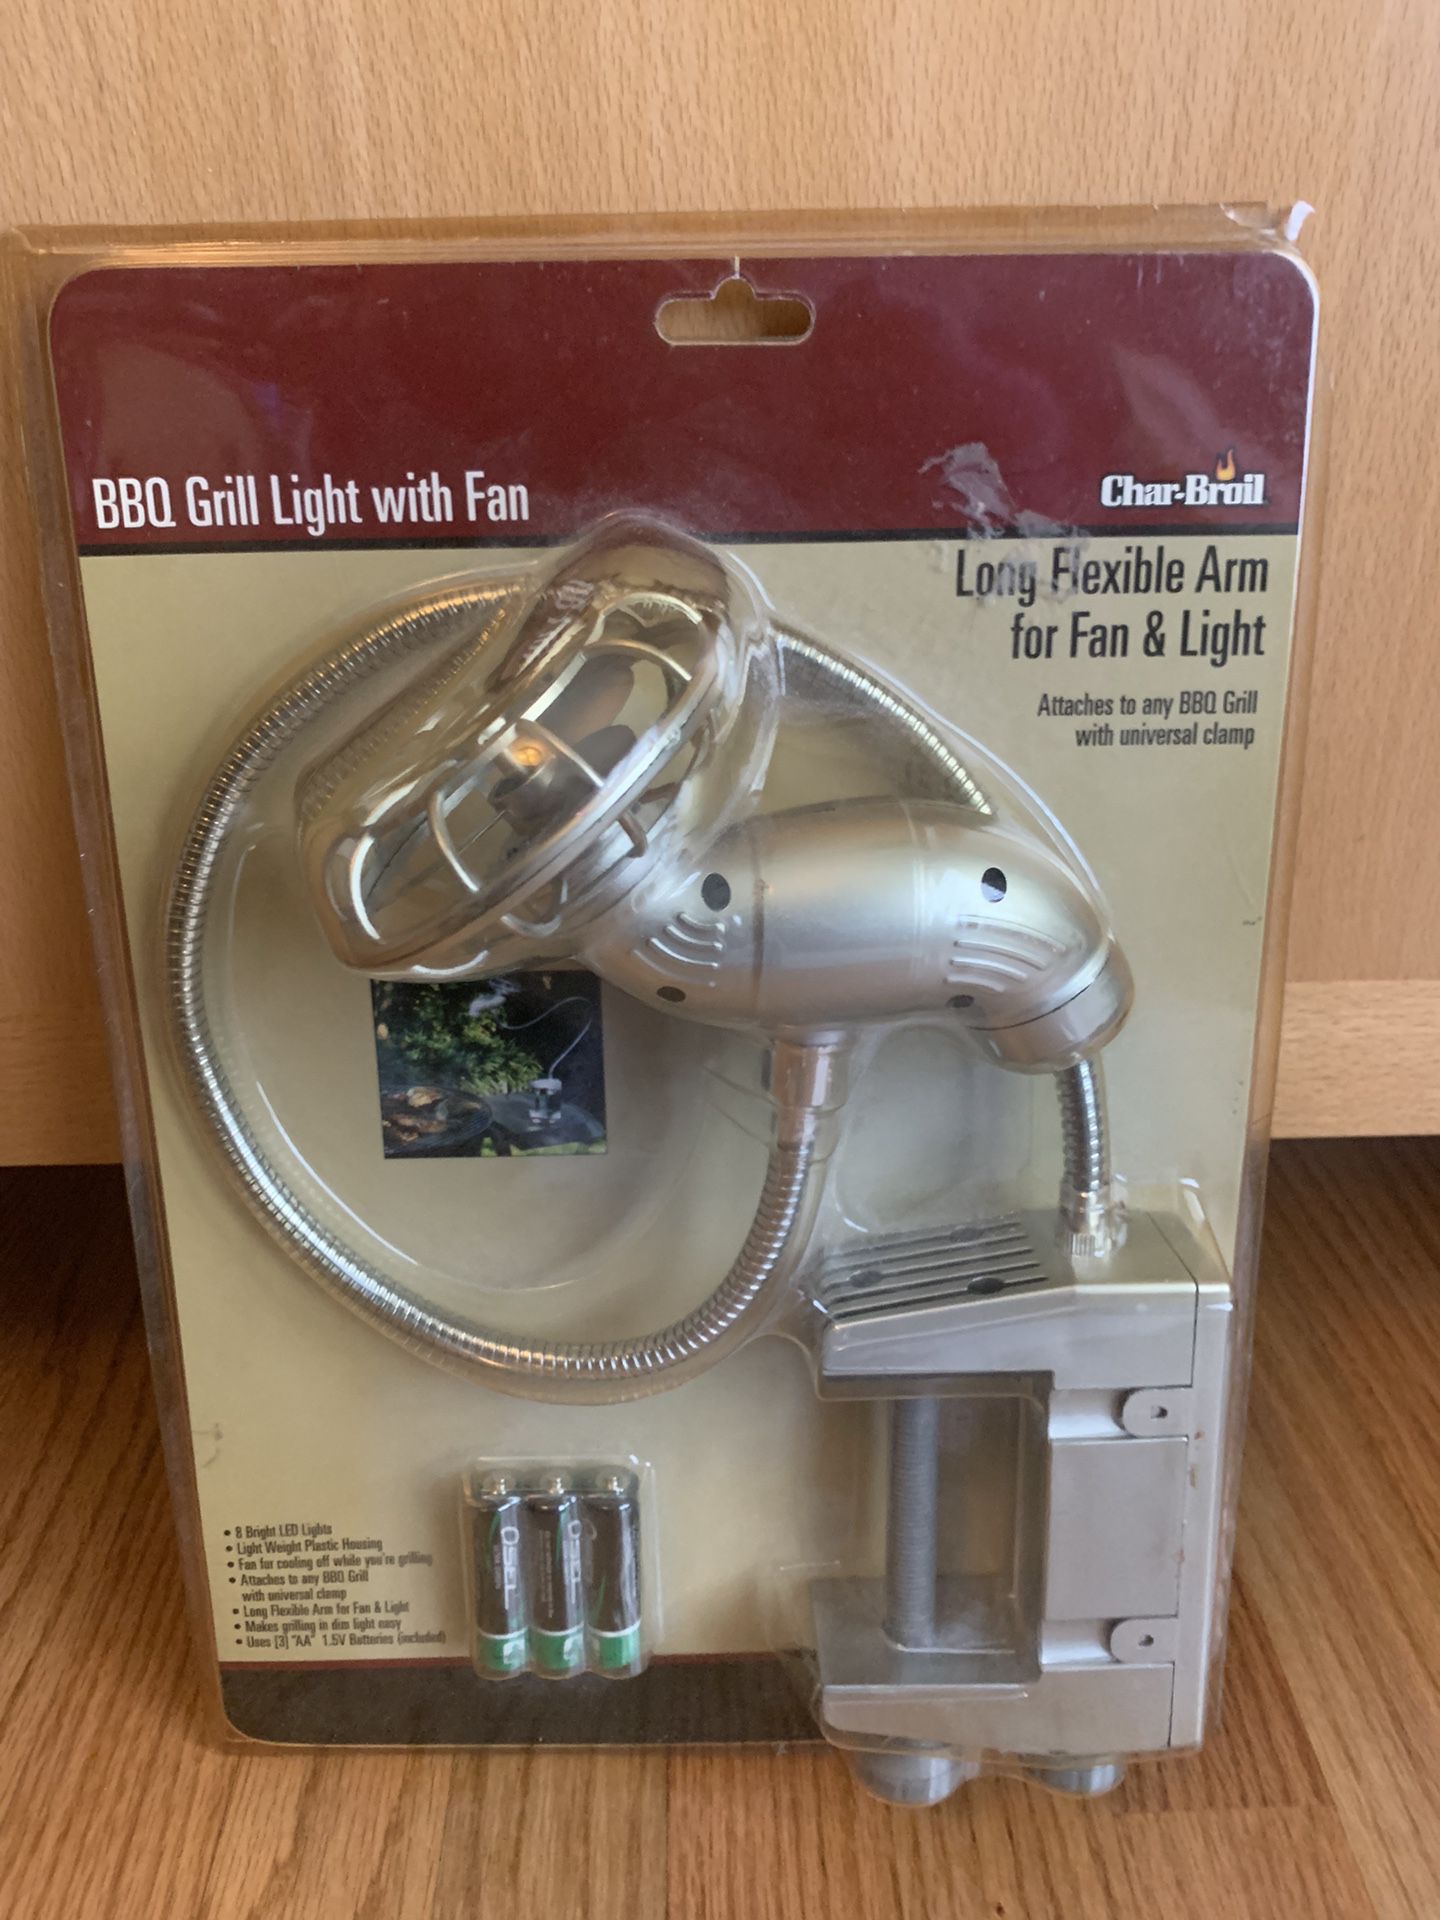 Char-Broil BBQ Grill Light with Fan